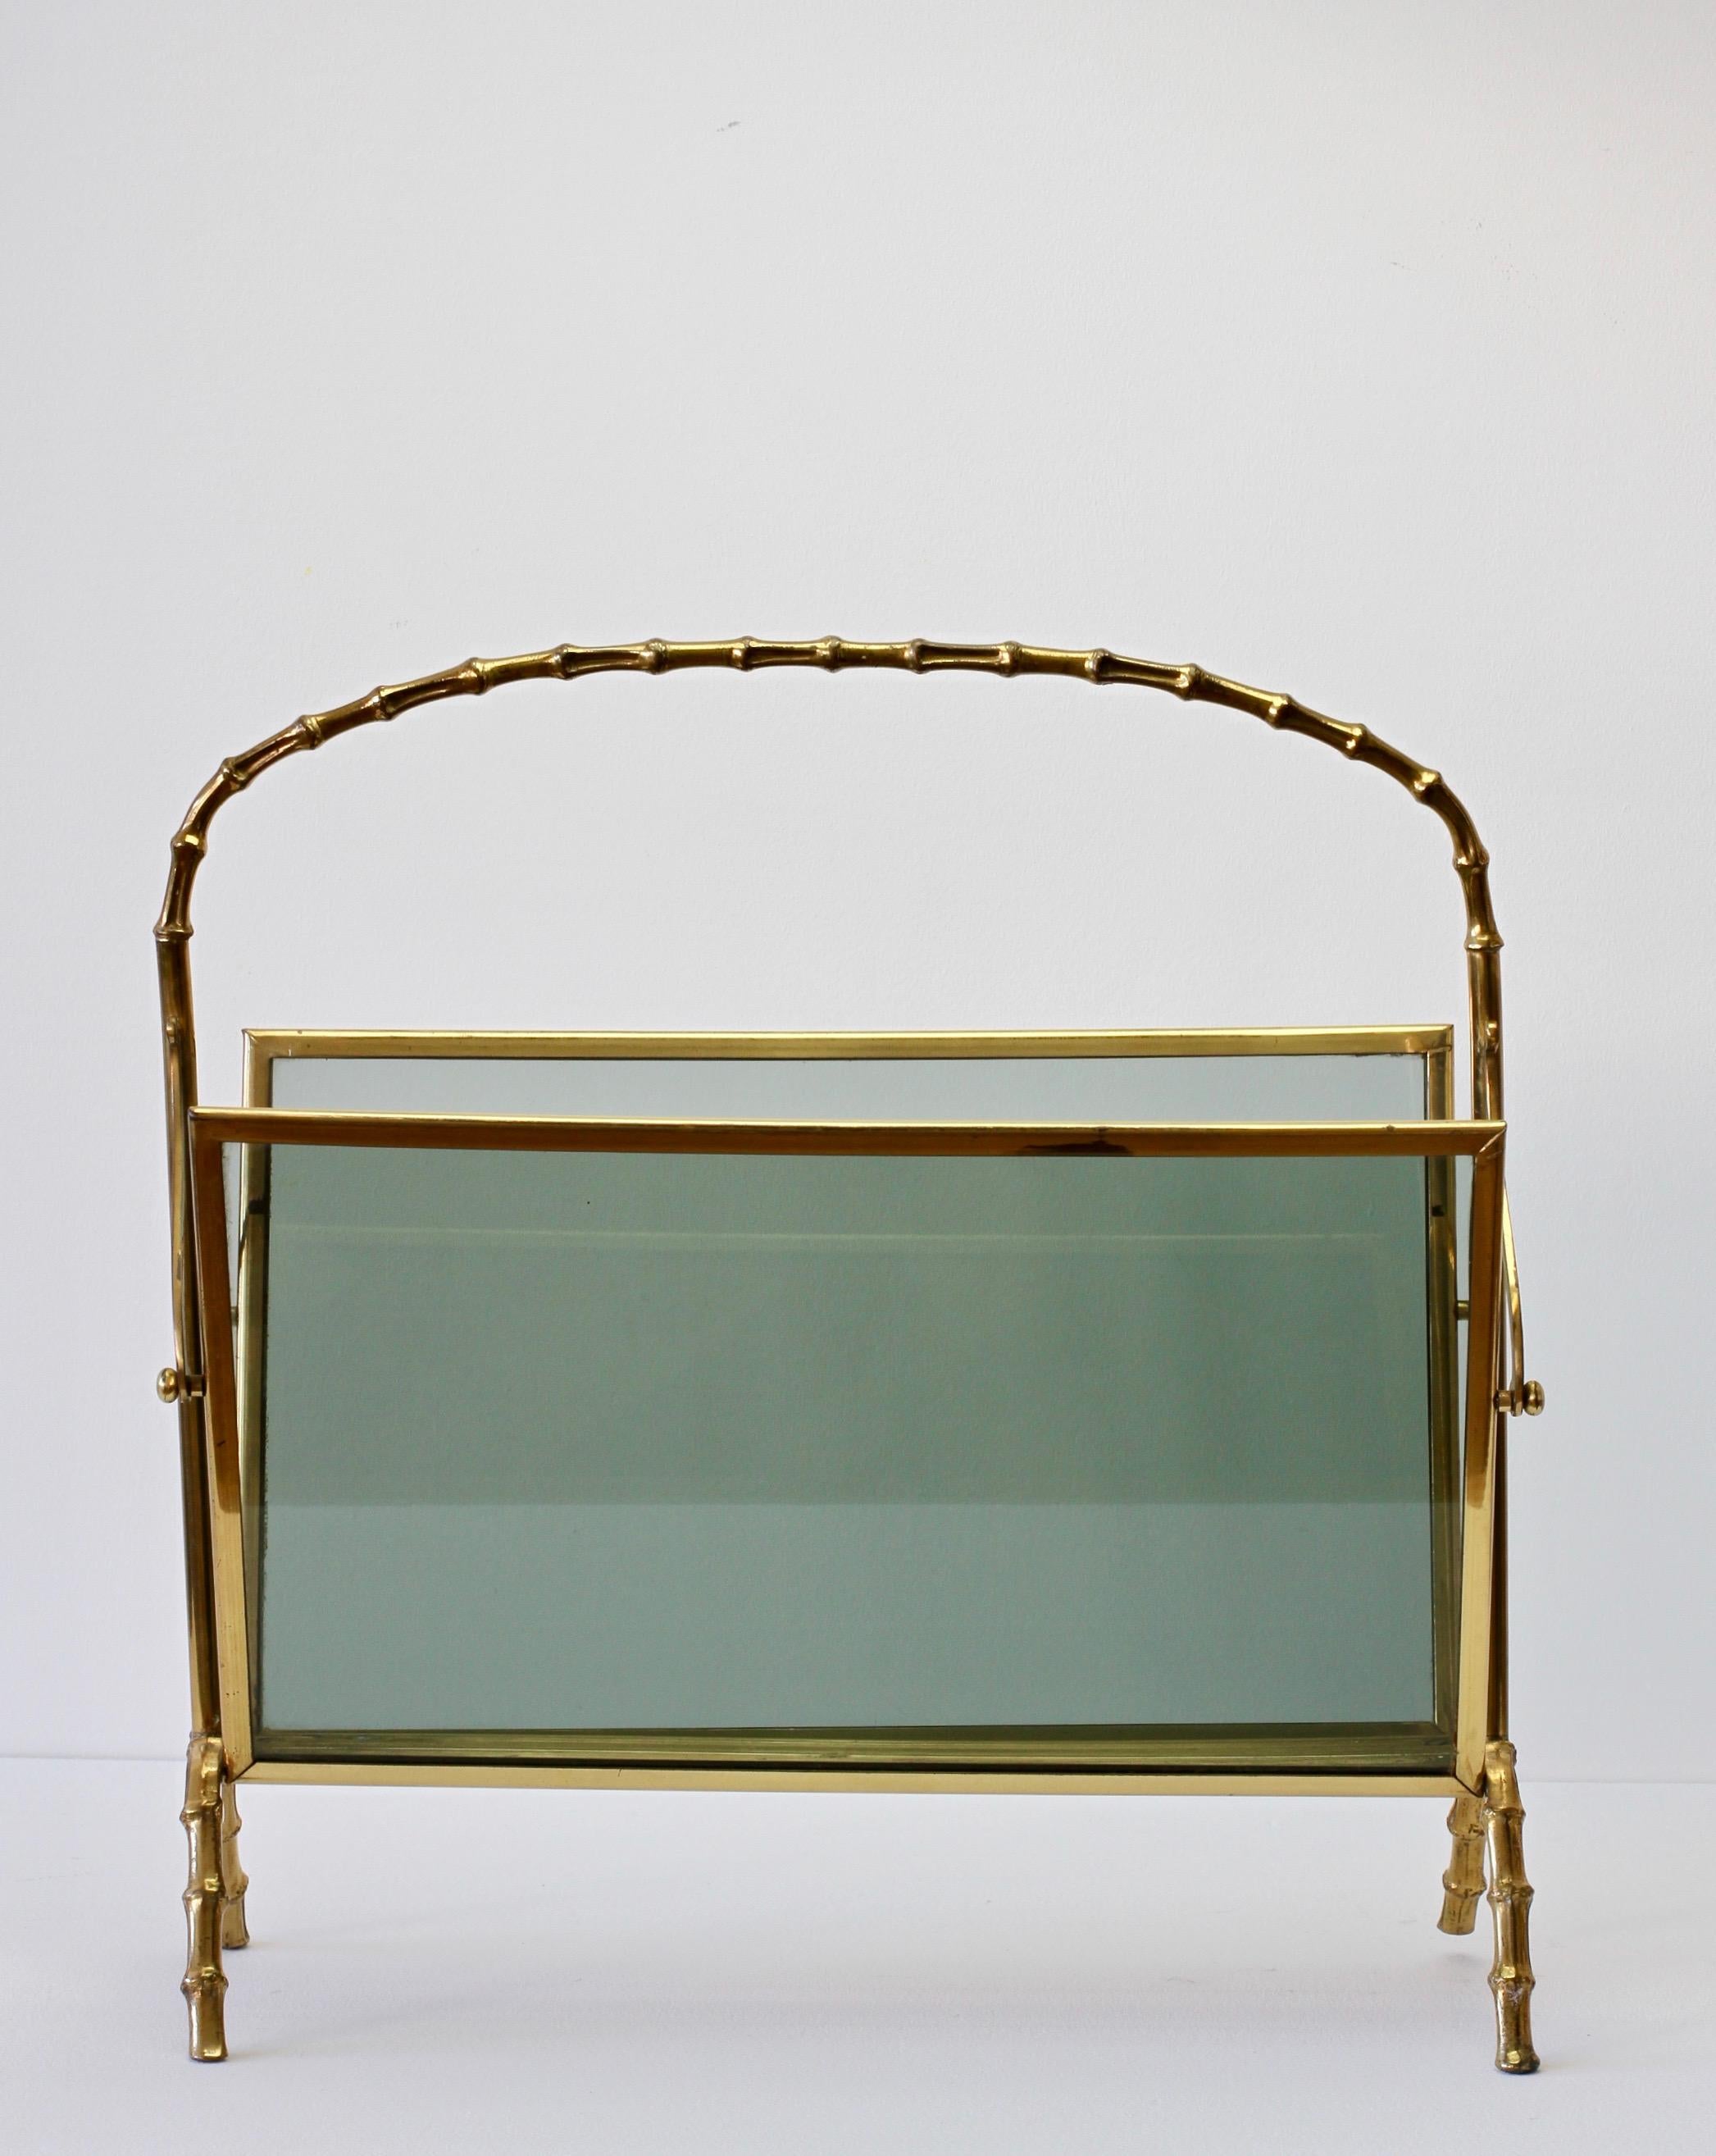 Smoked Glass Maison Baguès Attributed Cast Brass Faux Bamboo Magazine Rack or Newspaper Stand For Sale